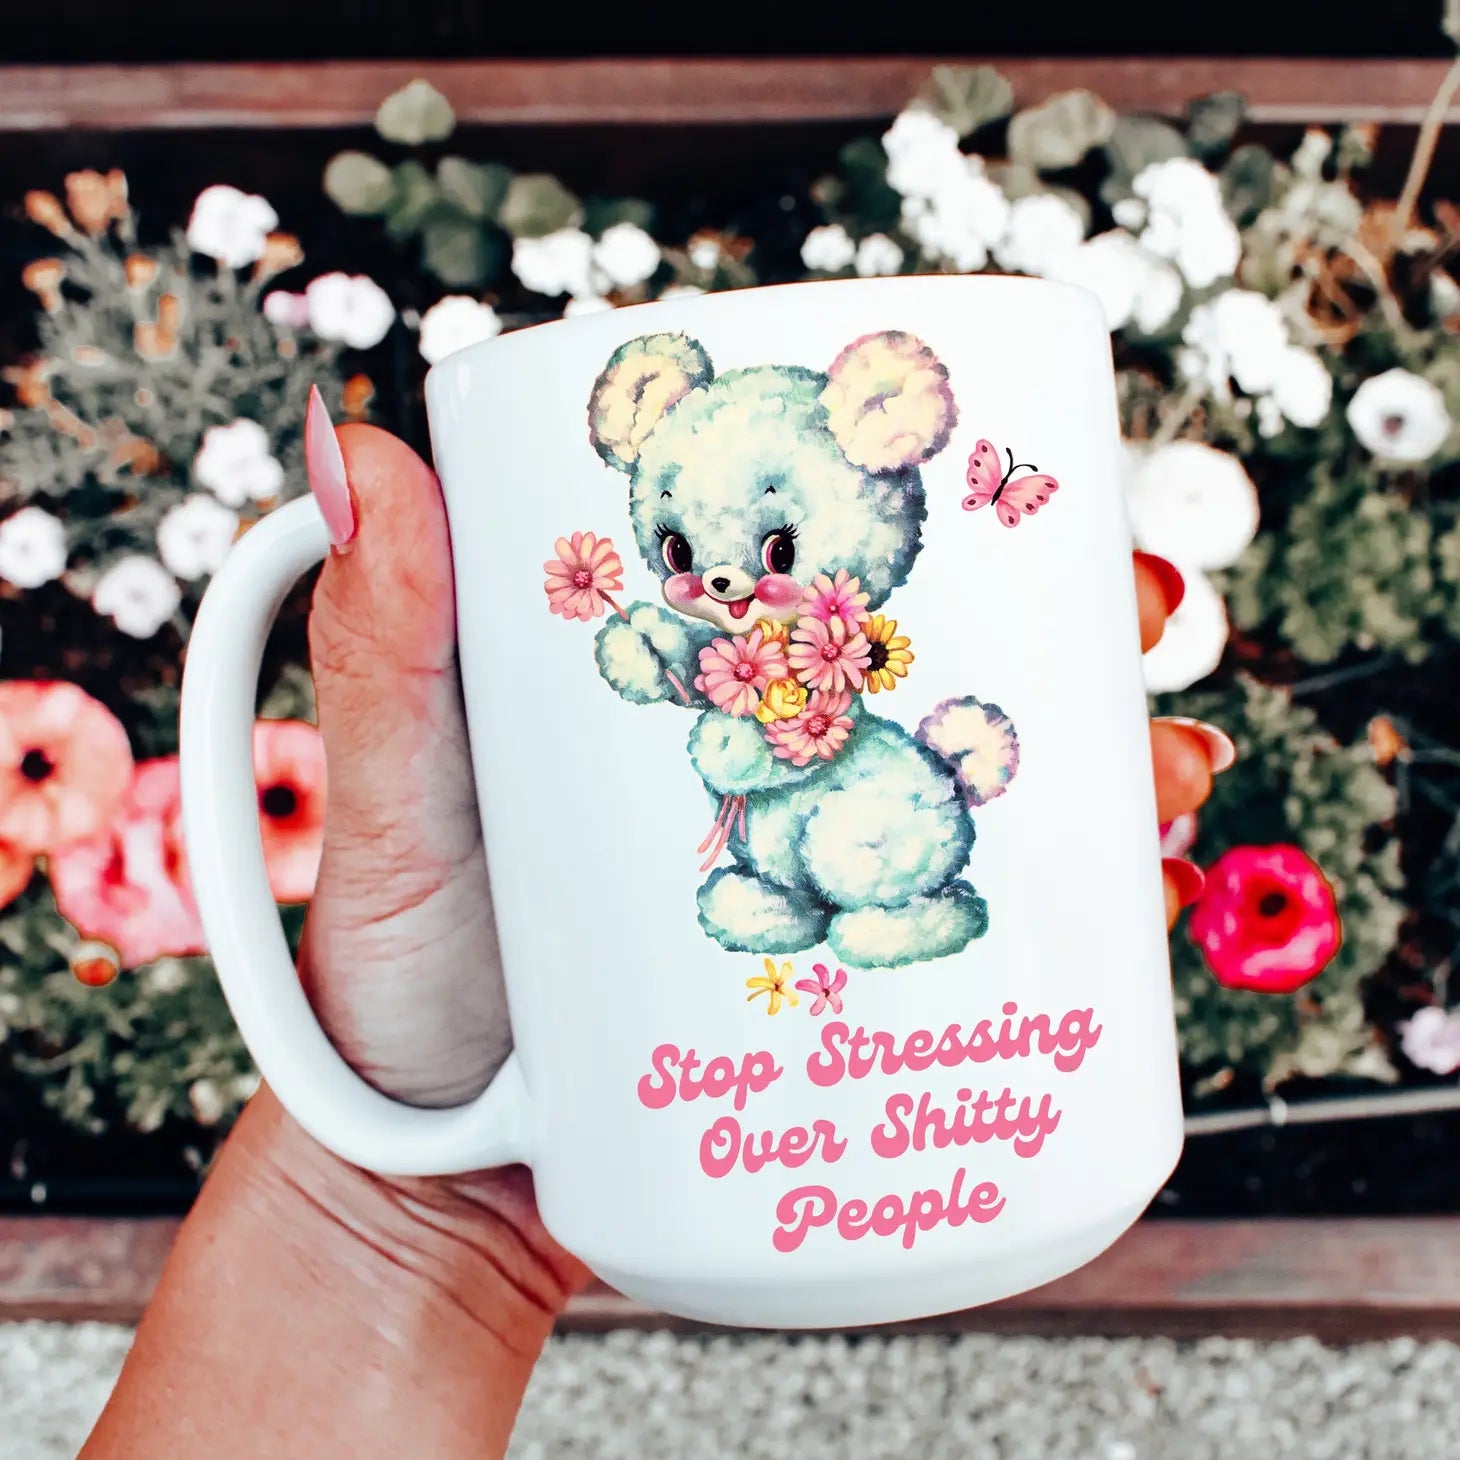 Stop Stressing Over Shitty People Mug